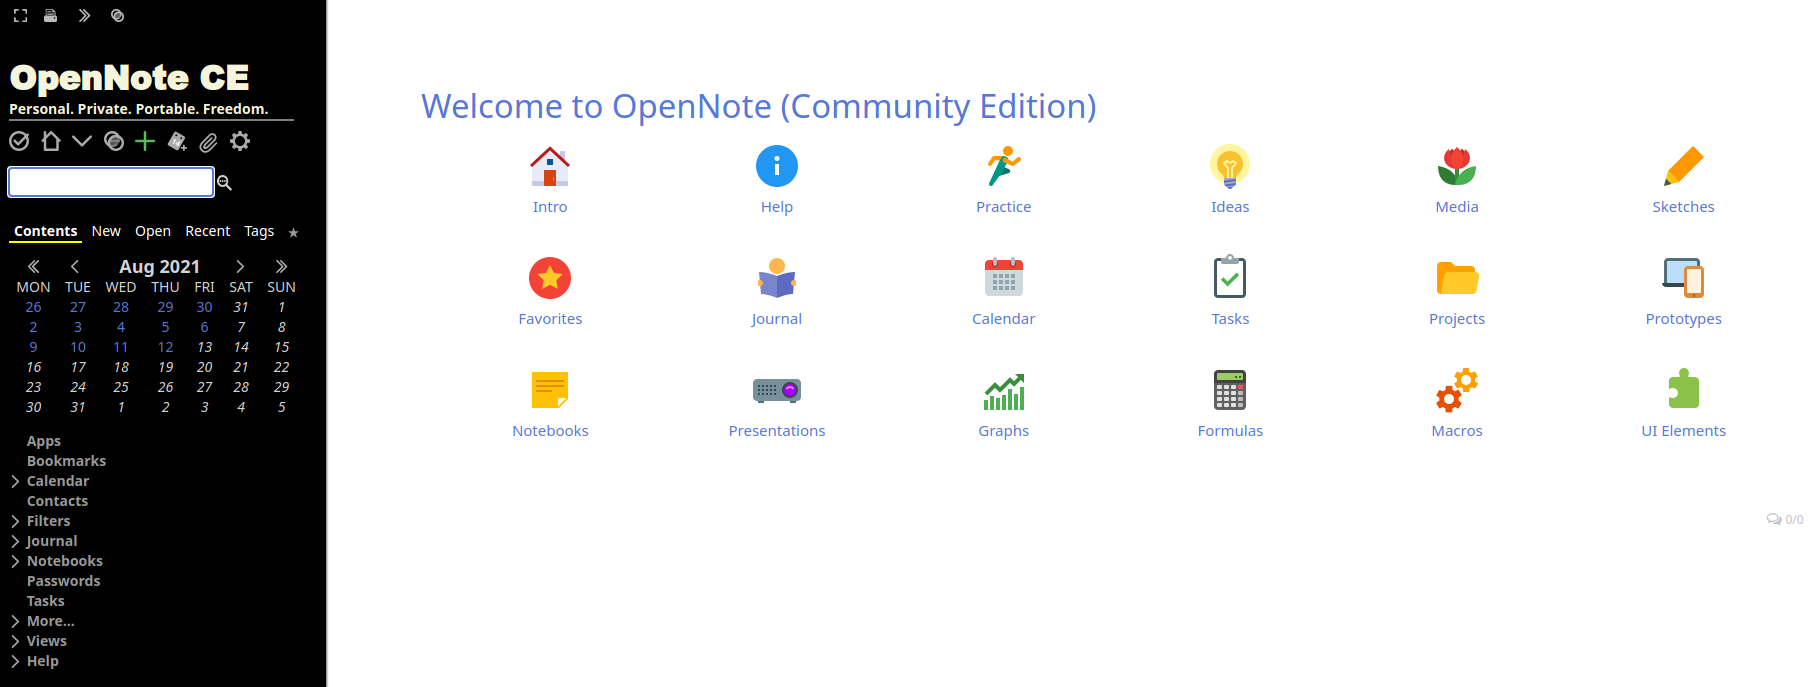 OpenNote